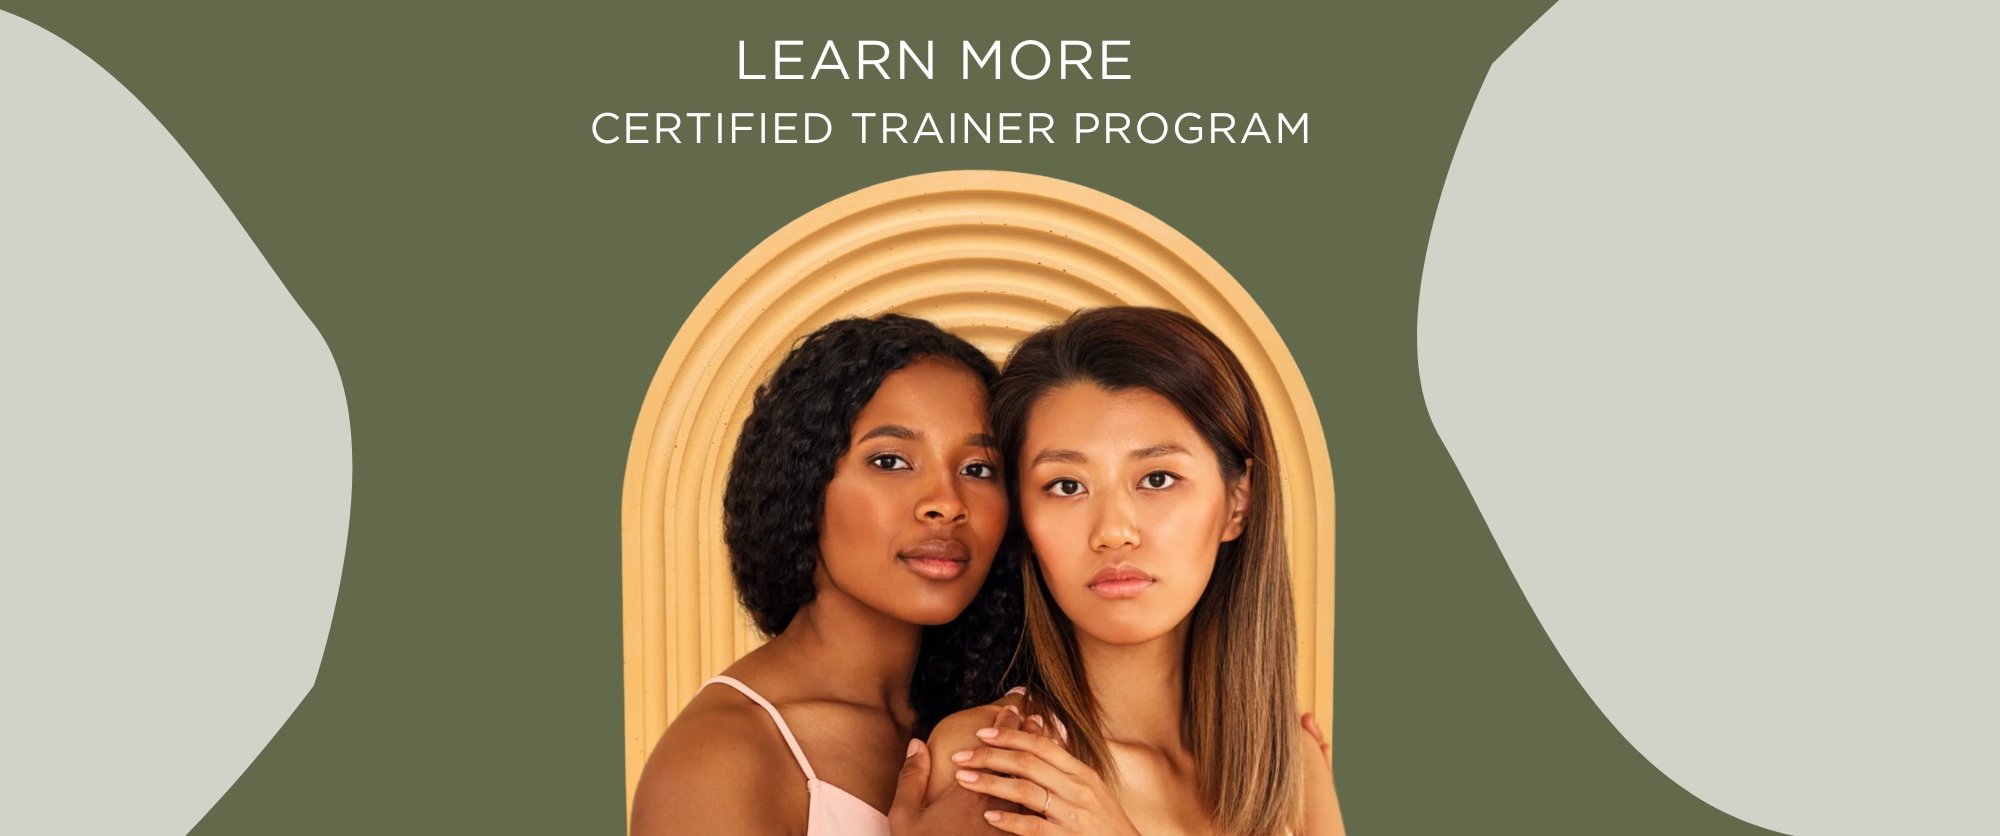 Bee Pampered Offers Estheticians a Certified Trainer Program. - Shop Bee Pampered